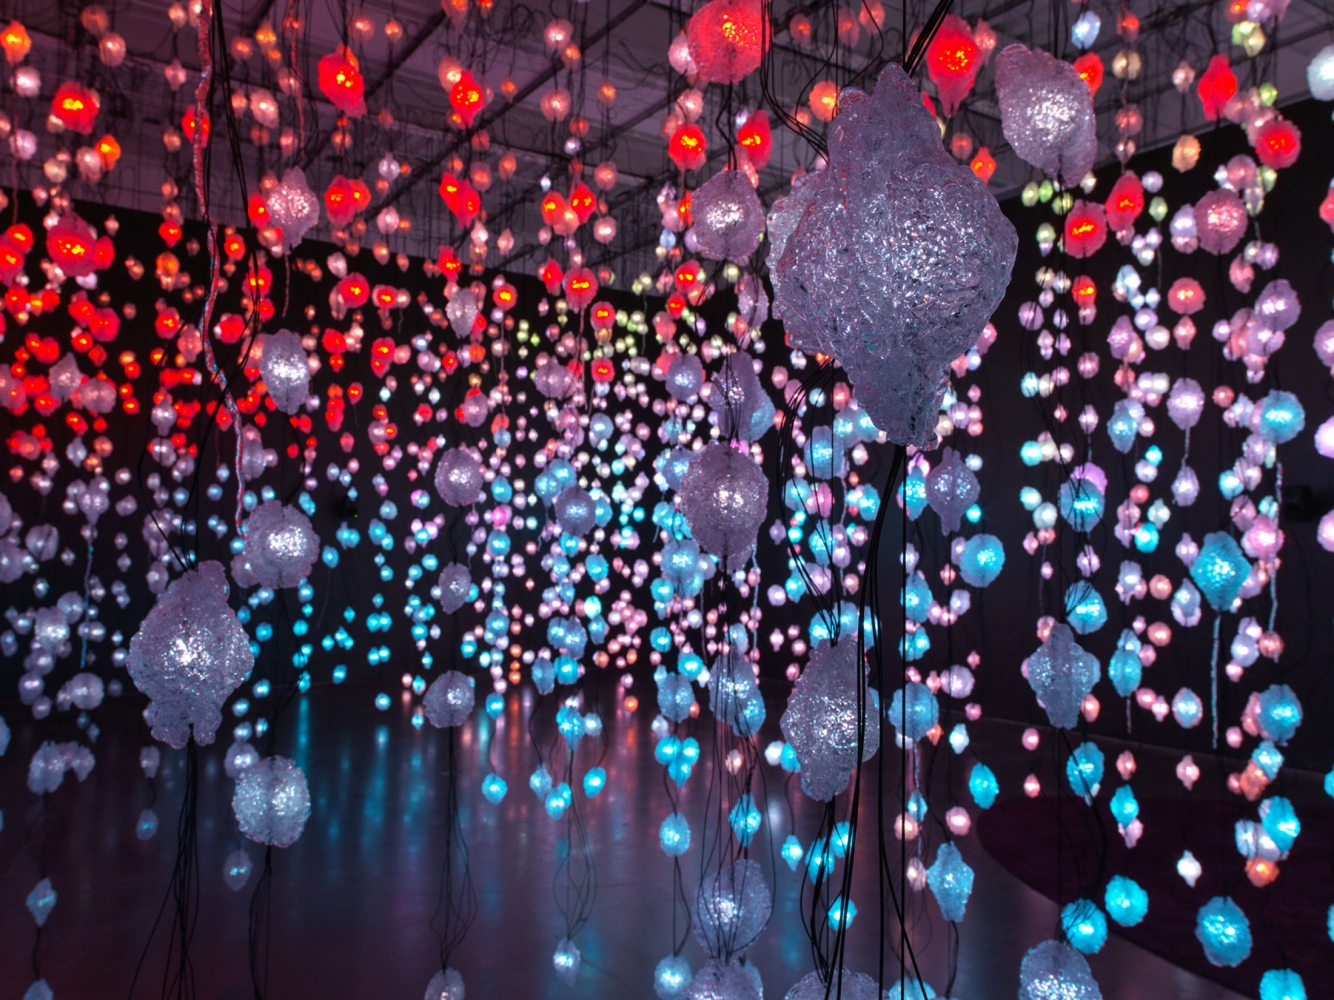 Pipilotti Rist
Pixelwald (Pixel&amp;nbsp;Forest), 2016
Hanging LED light installation and media player
Duration: 35 minutes
Dimensions variable
Installation view,&amp;nbsp;Pixel Forest
October 26, 2016 &amp;ndash; January 15, 2017
New Museum, New York